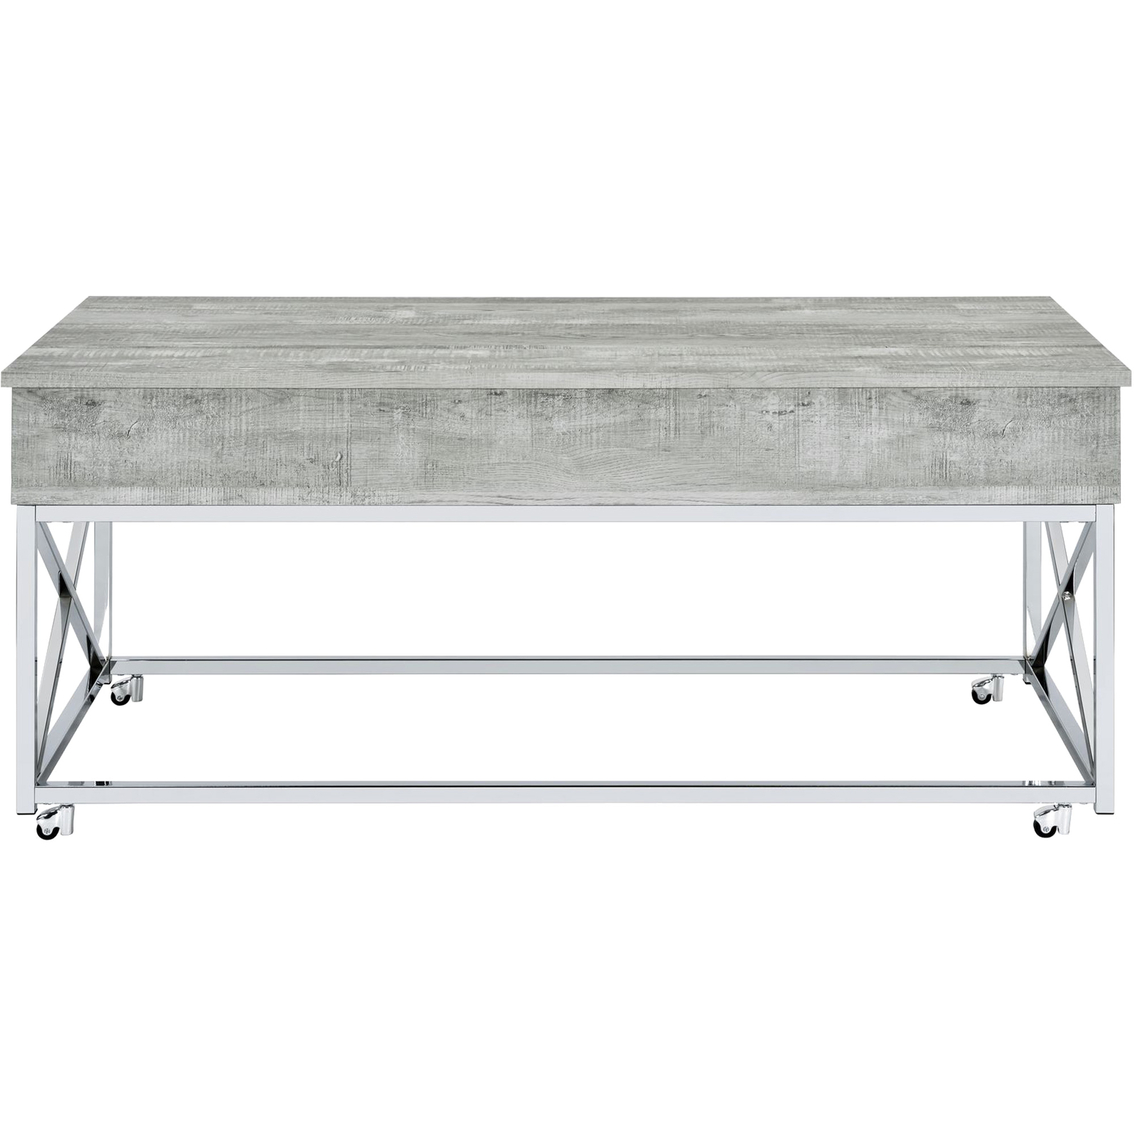 Elements Eliza Coffee Table with Lift Top and Casters - Image 5 of 10